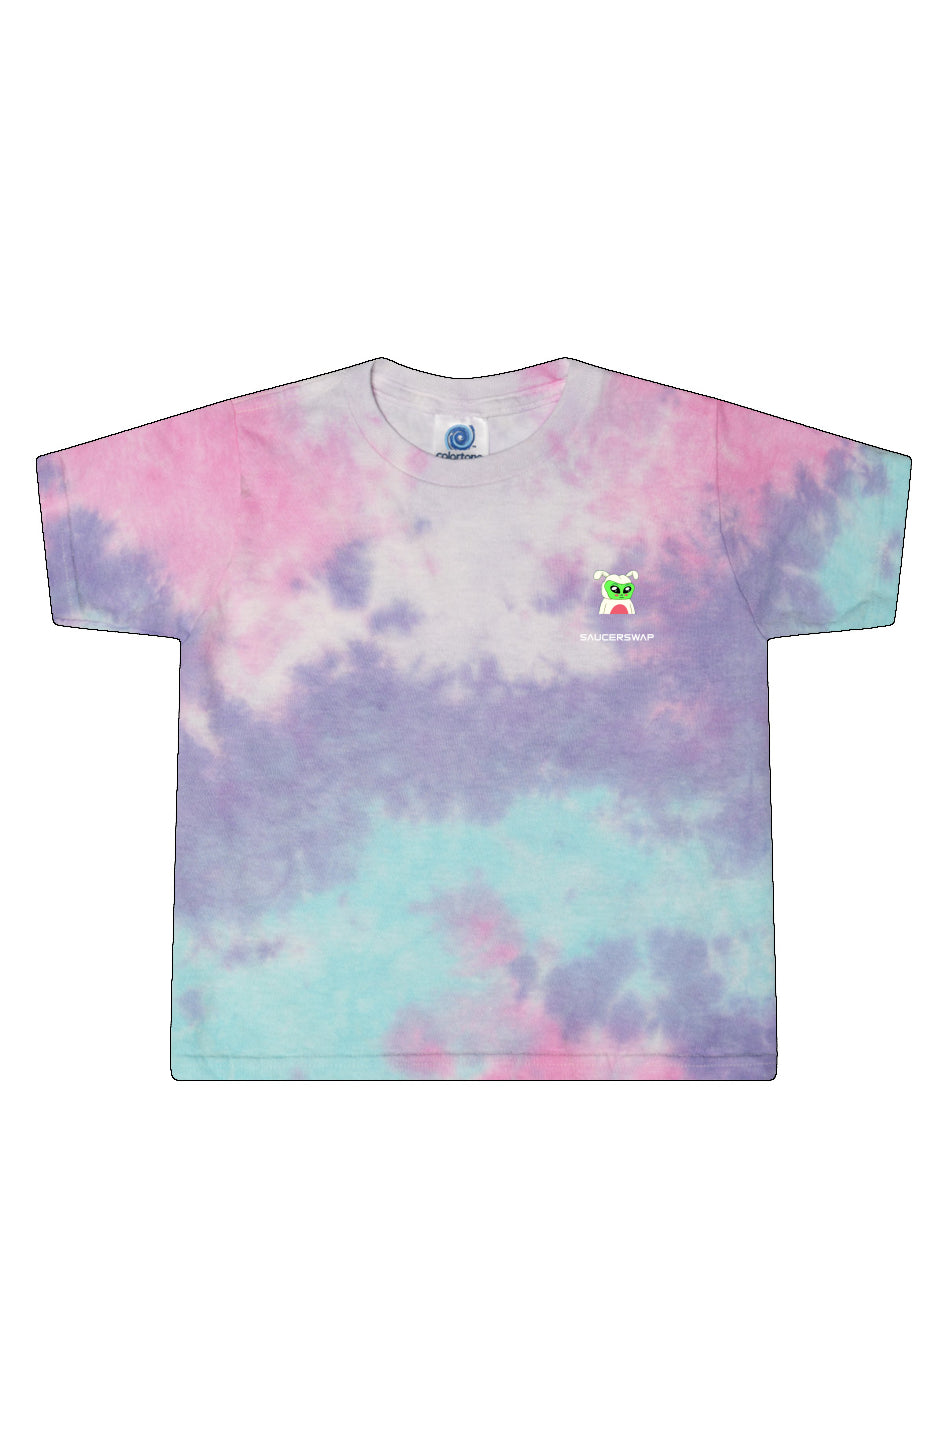 Larry Bunny Tie-Dye Cotton Candy Ladies' Cropped T-Shirt